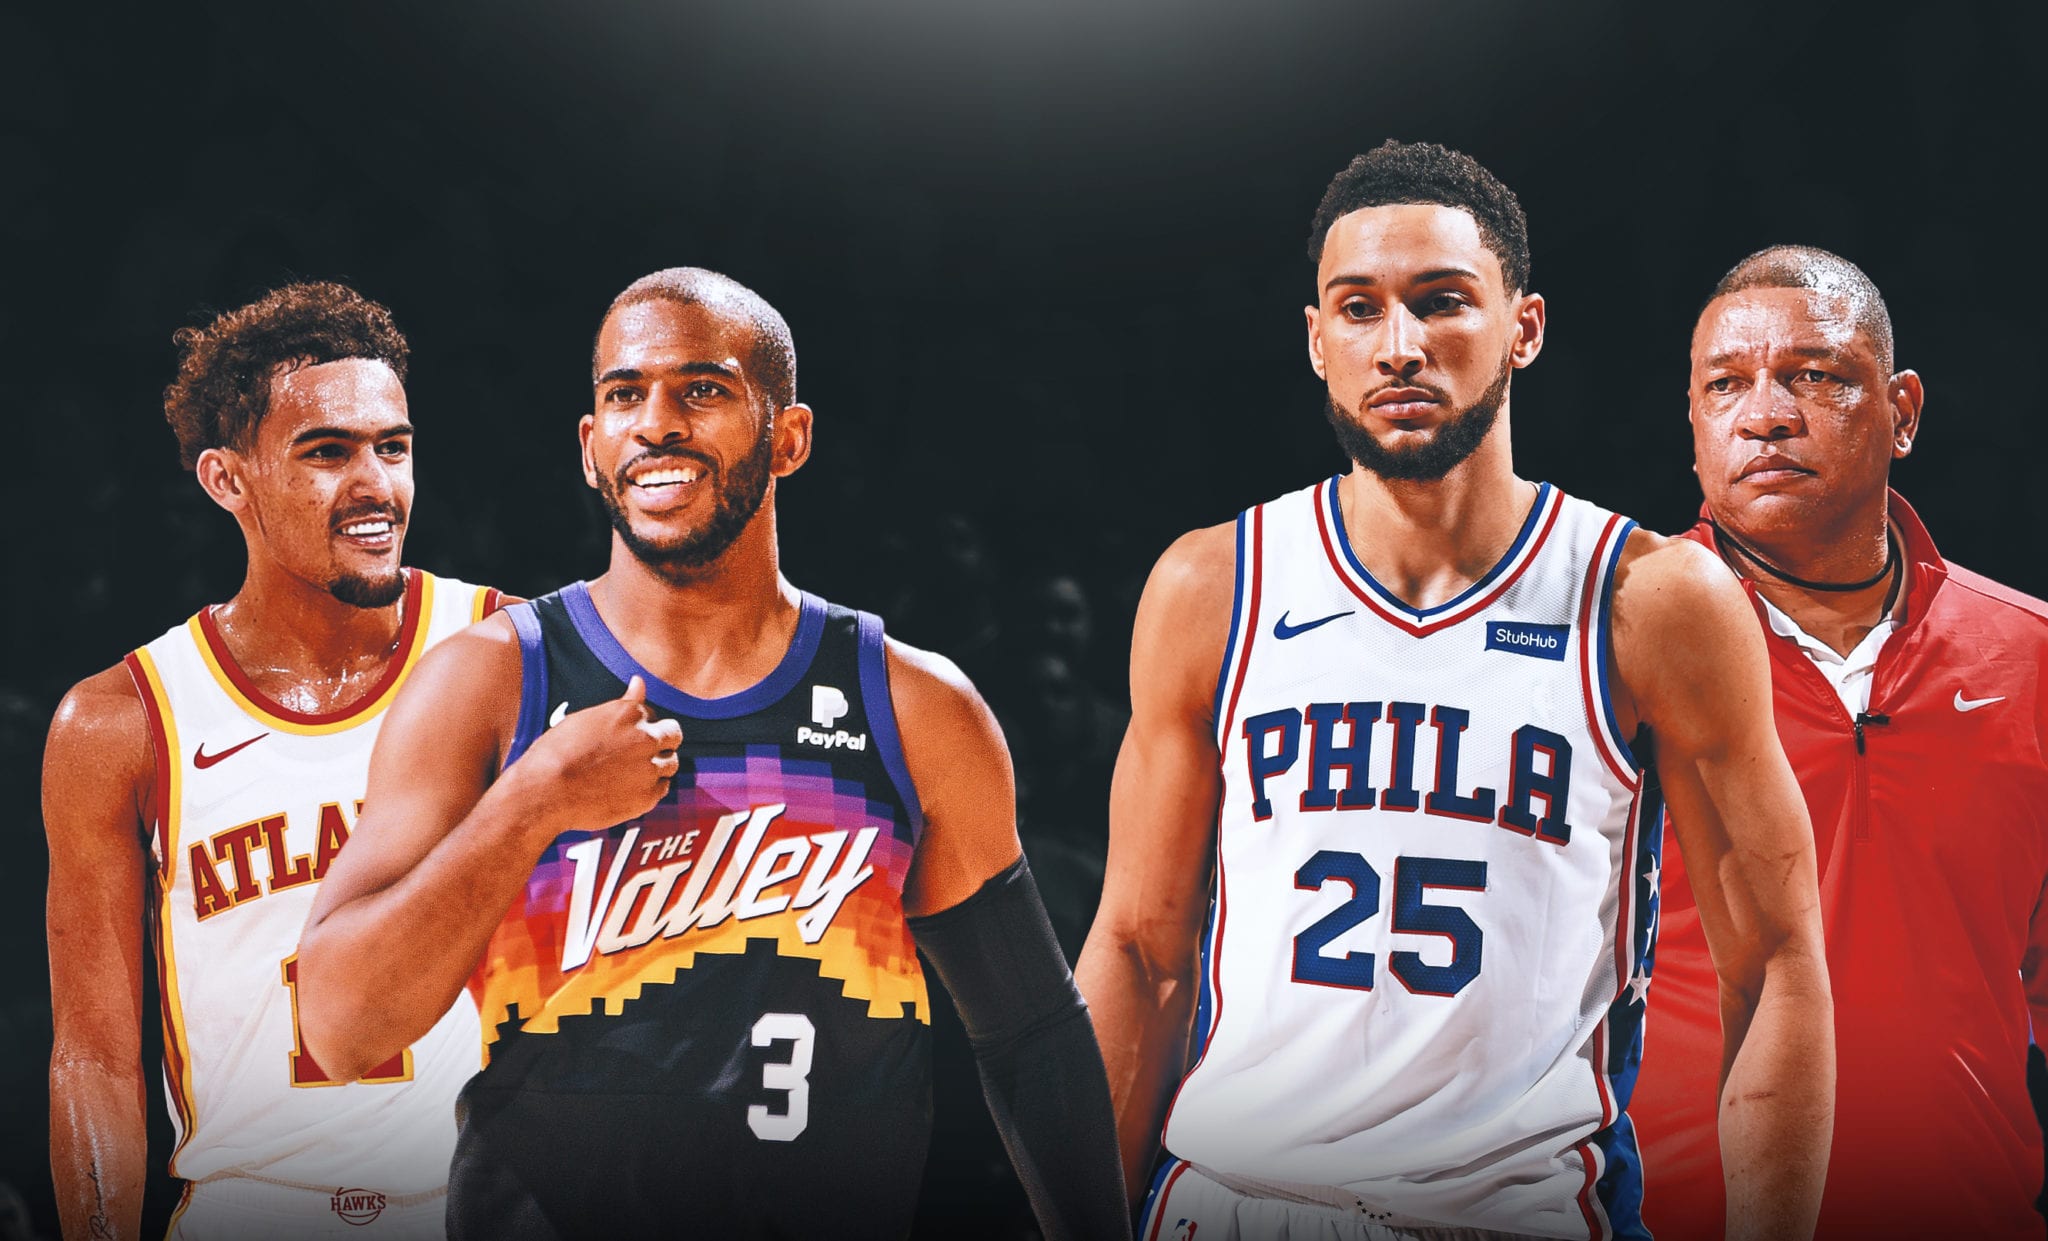 The Winners & Losers of the 2021 NBA Playoffs